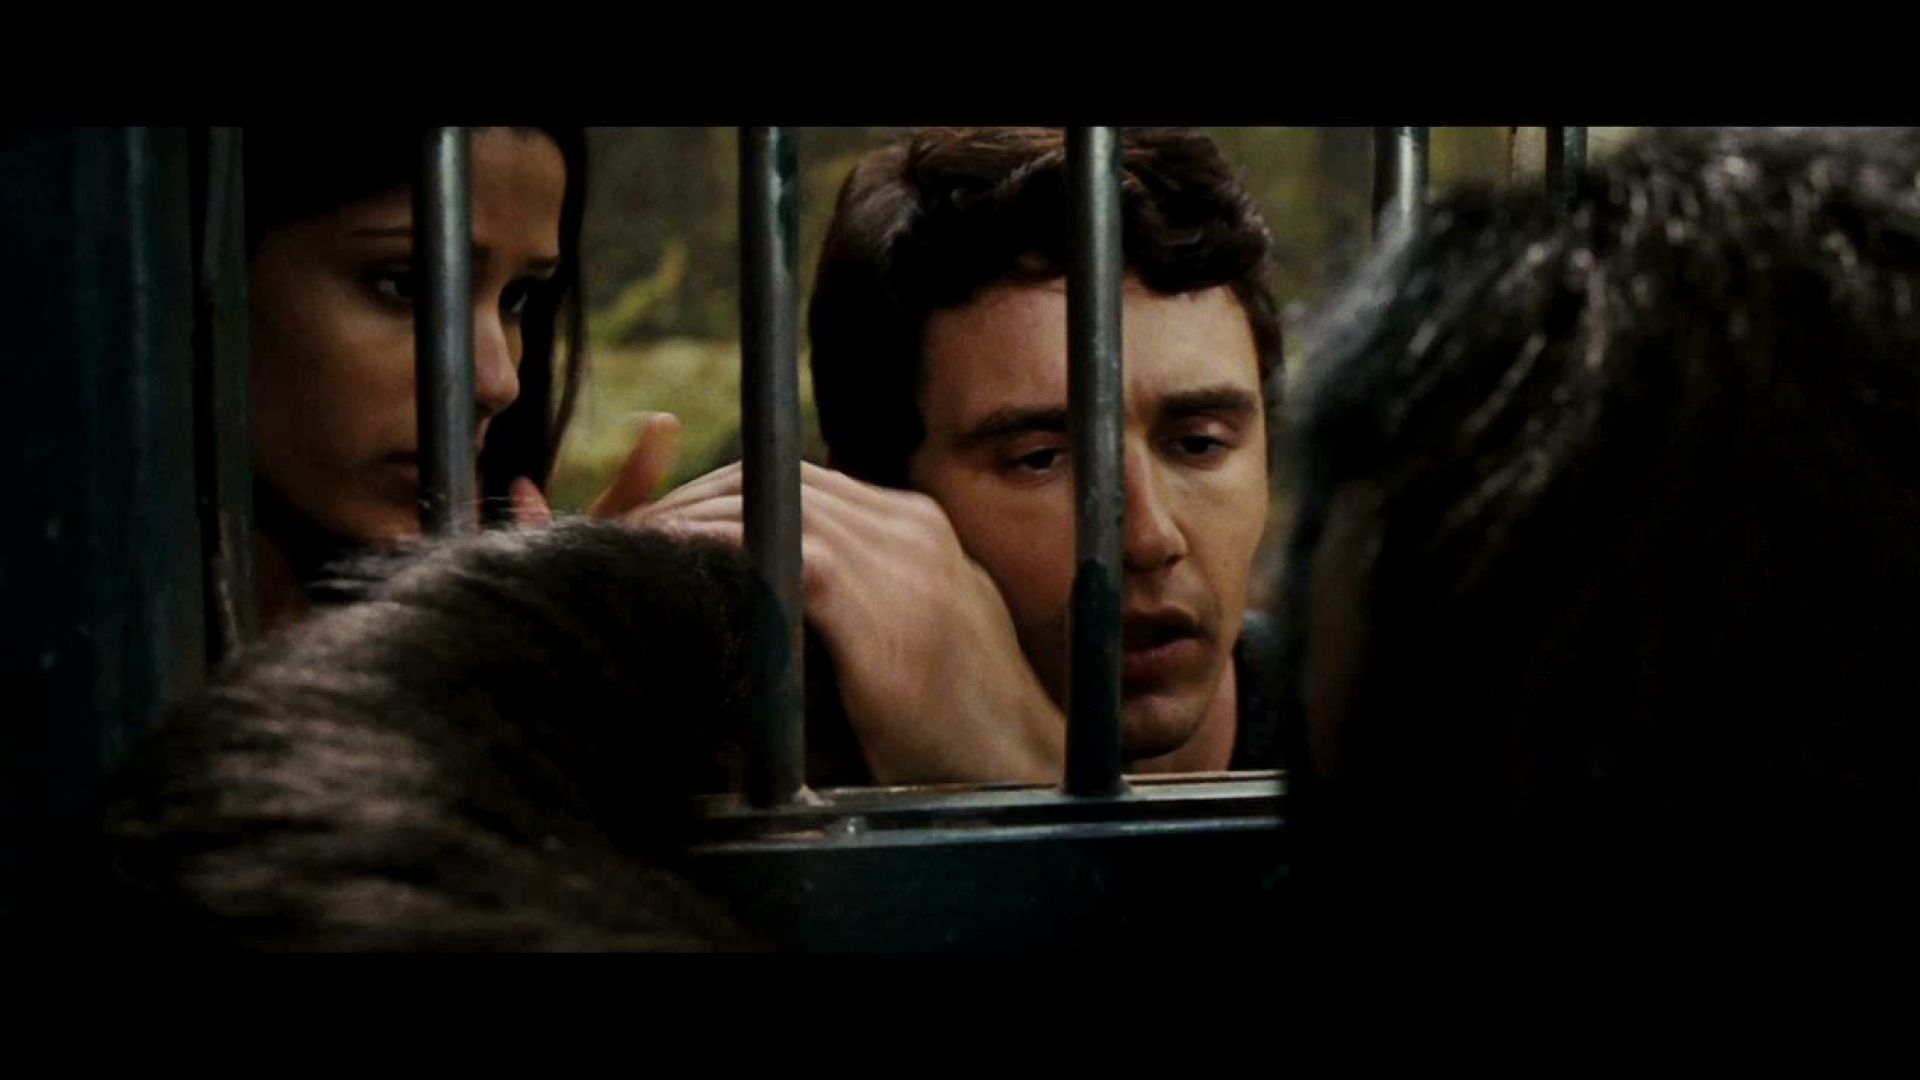 James Franco leaves Caesar behind in Rise of the Planet of the Apes